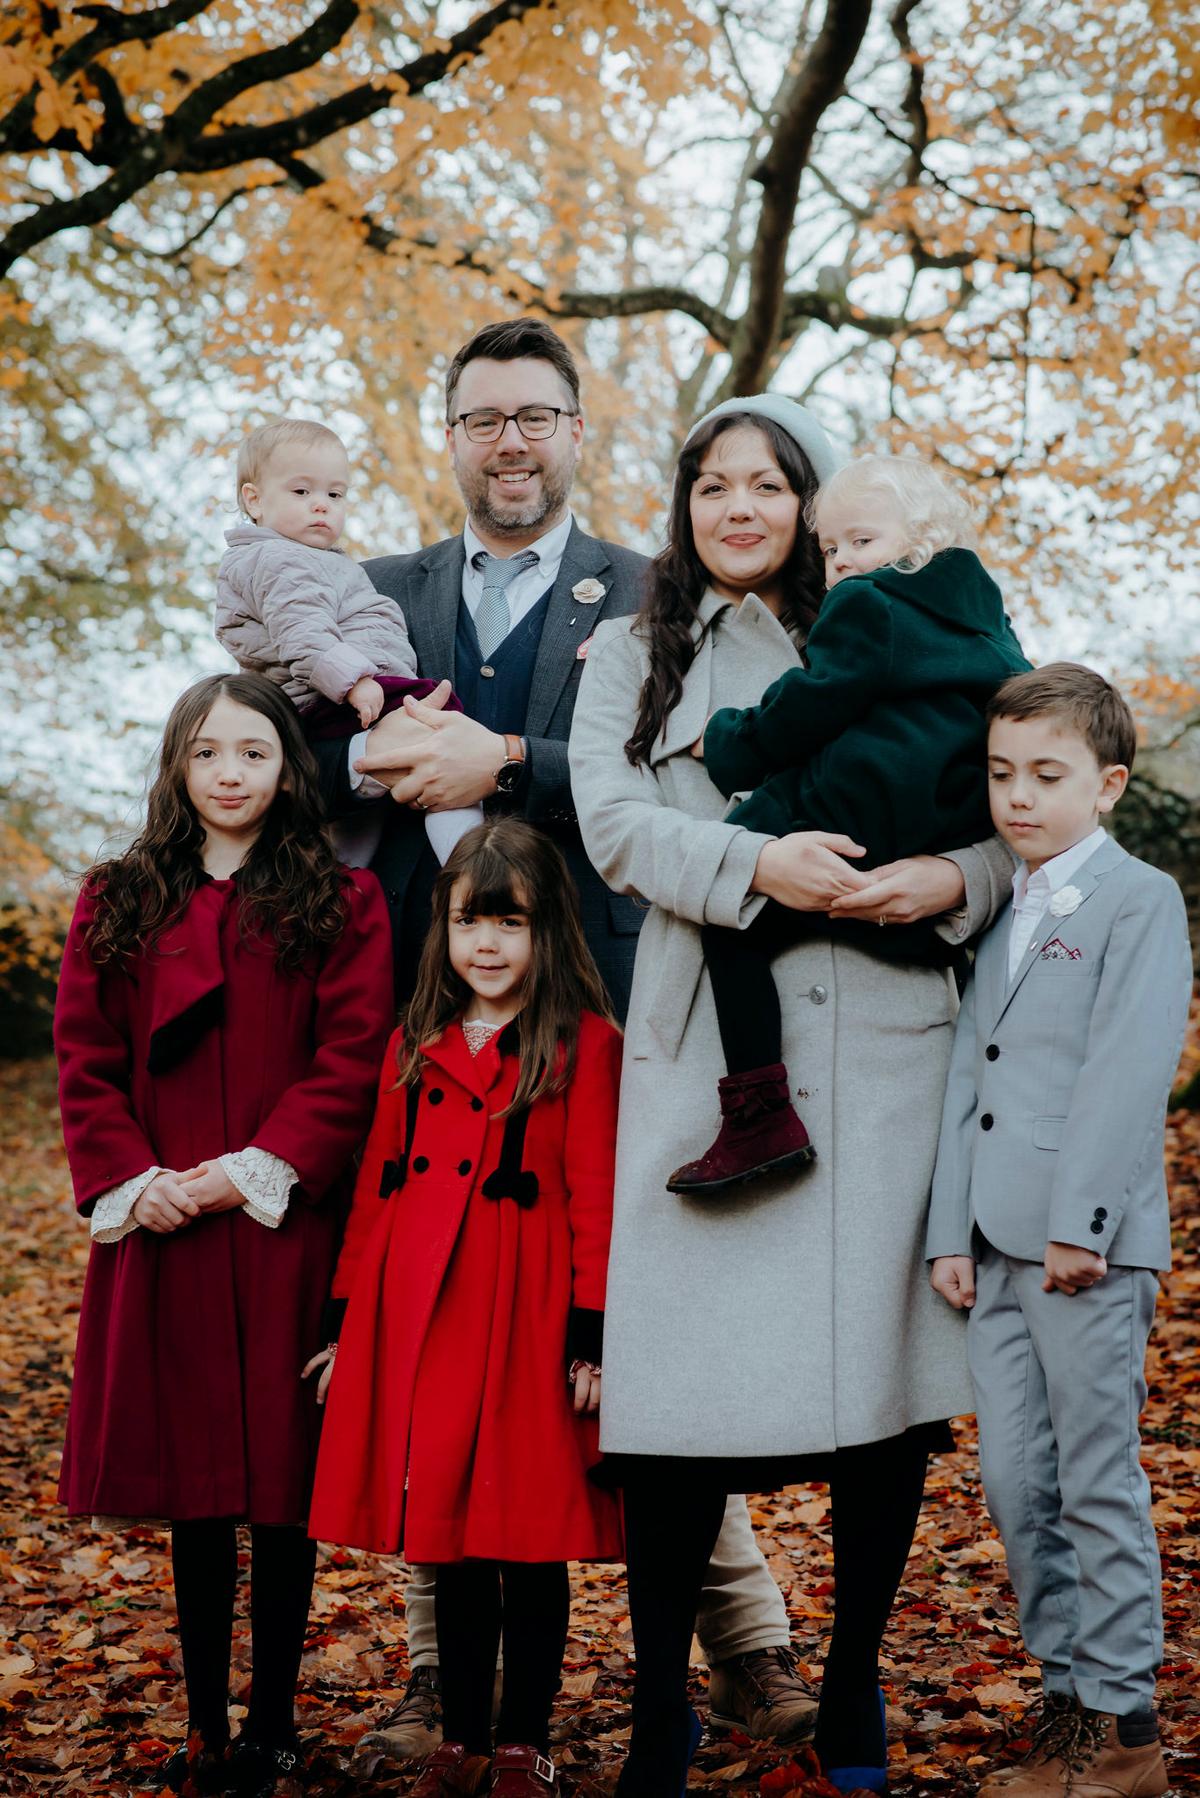 Megan Madden with her husband, Josh Madden, a lecturer in theology at Oxford University in England, and their five children. (Courtesy of Megan Madden)